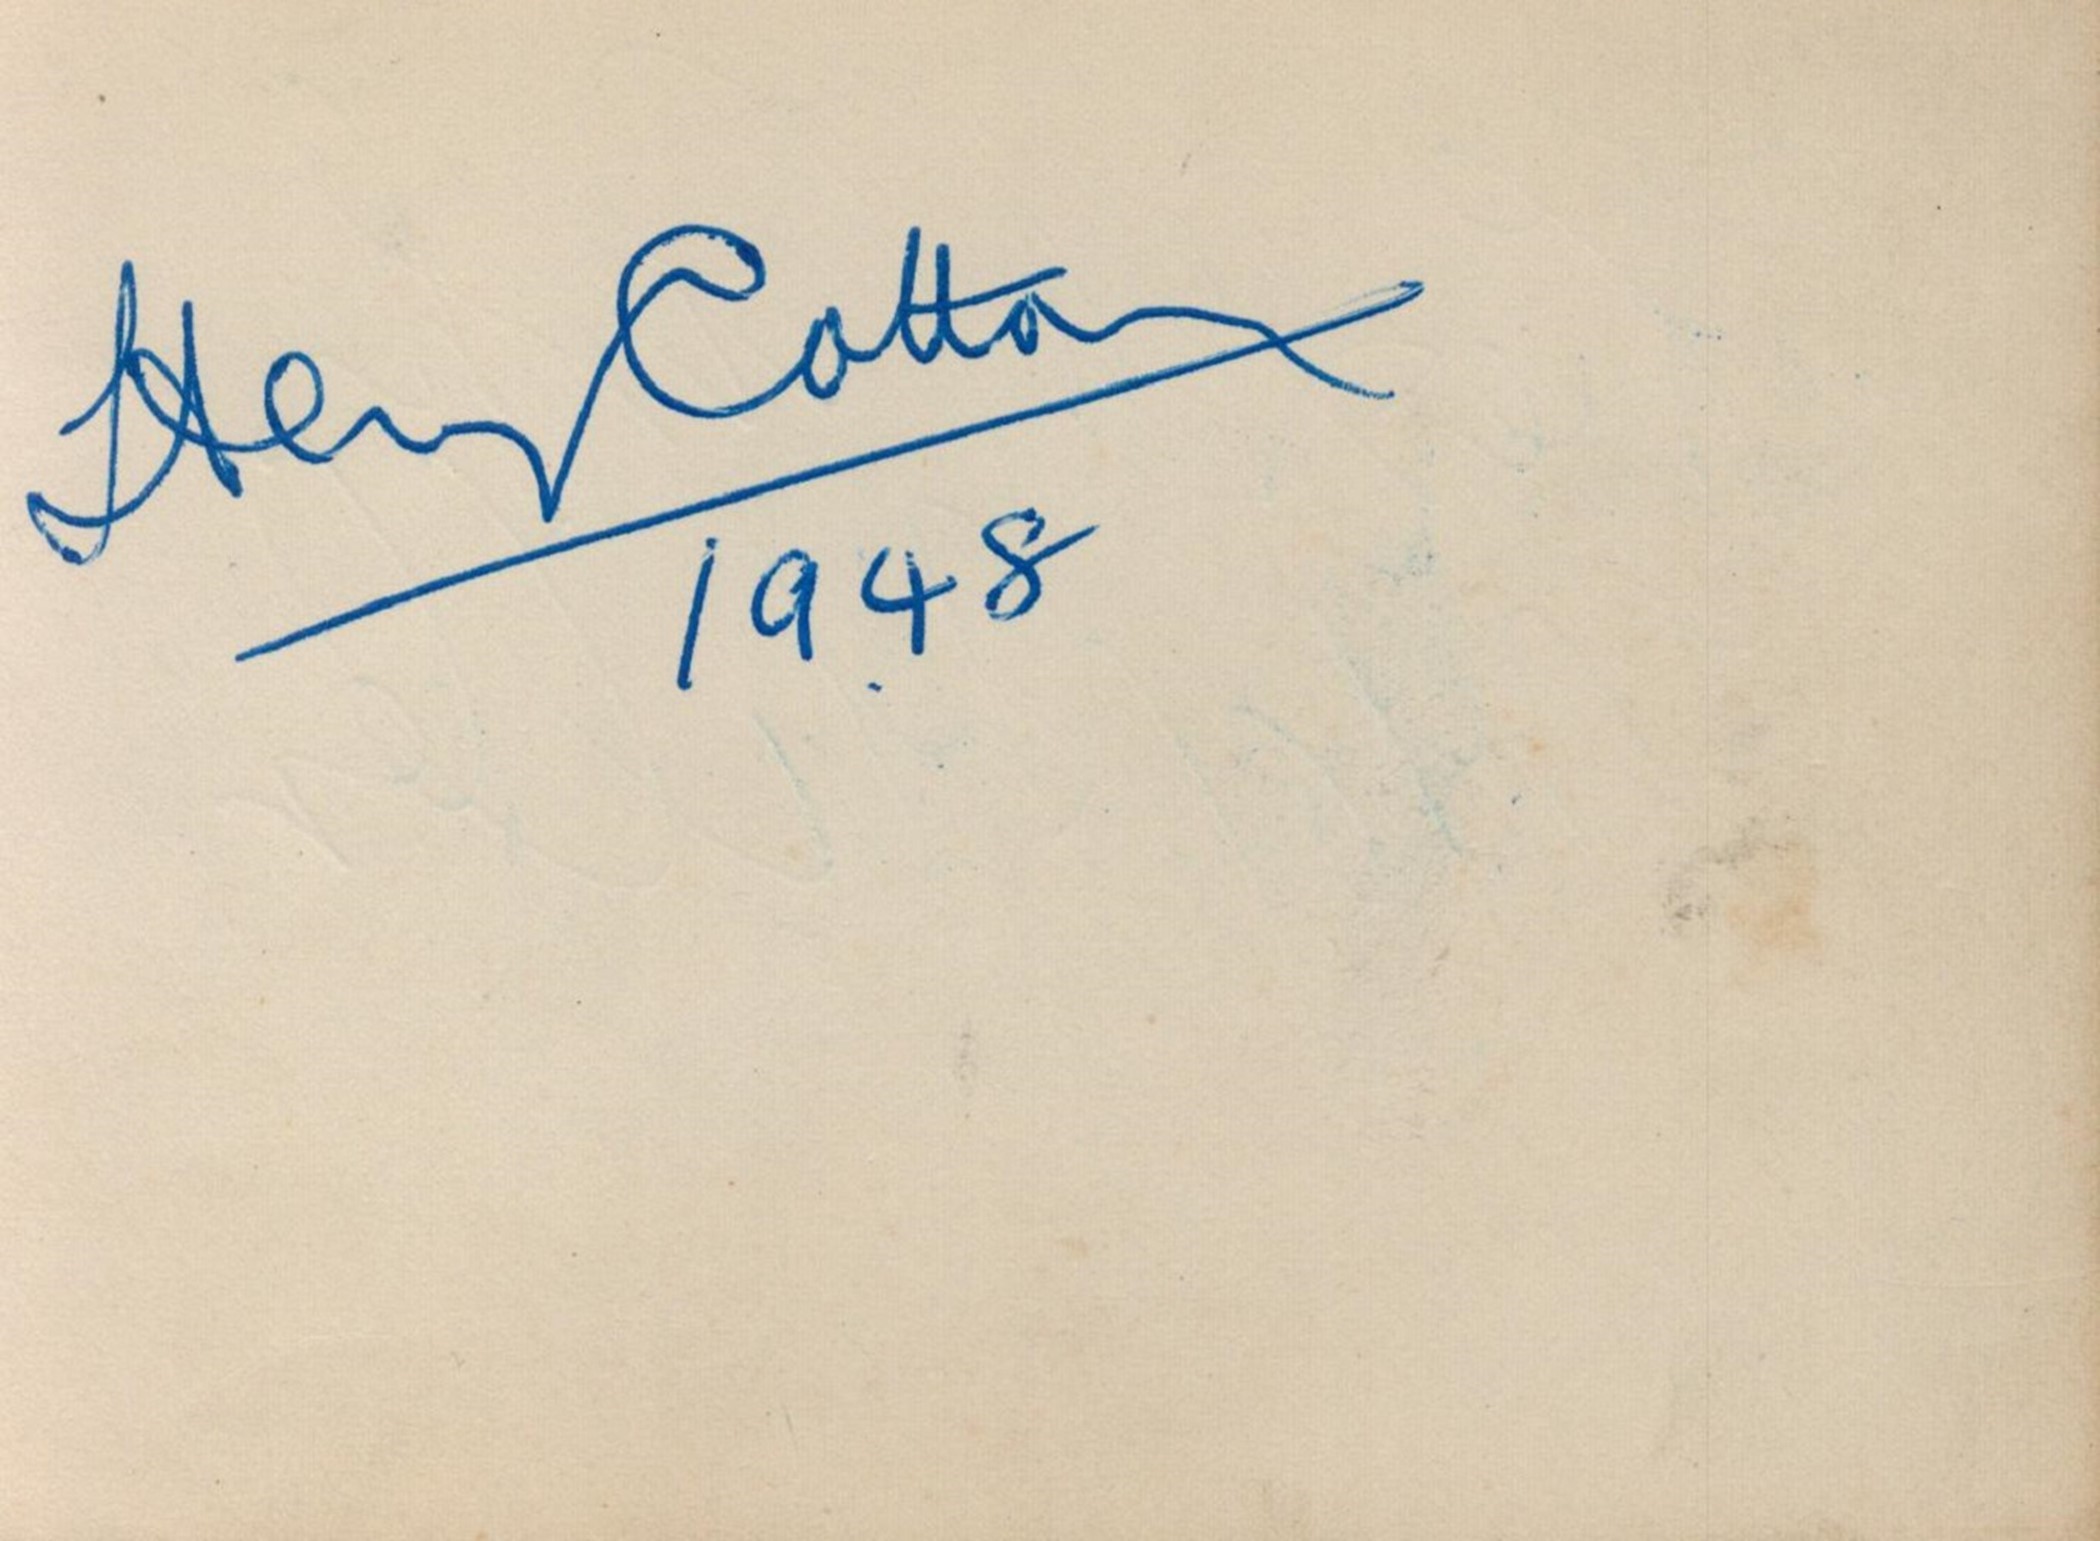 Golf Henry Cotton signed 5x4 album page dated 1948. Good condition. All autographed items come